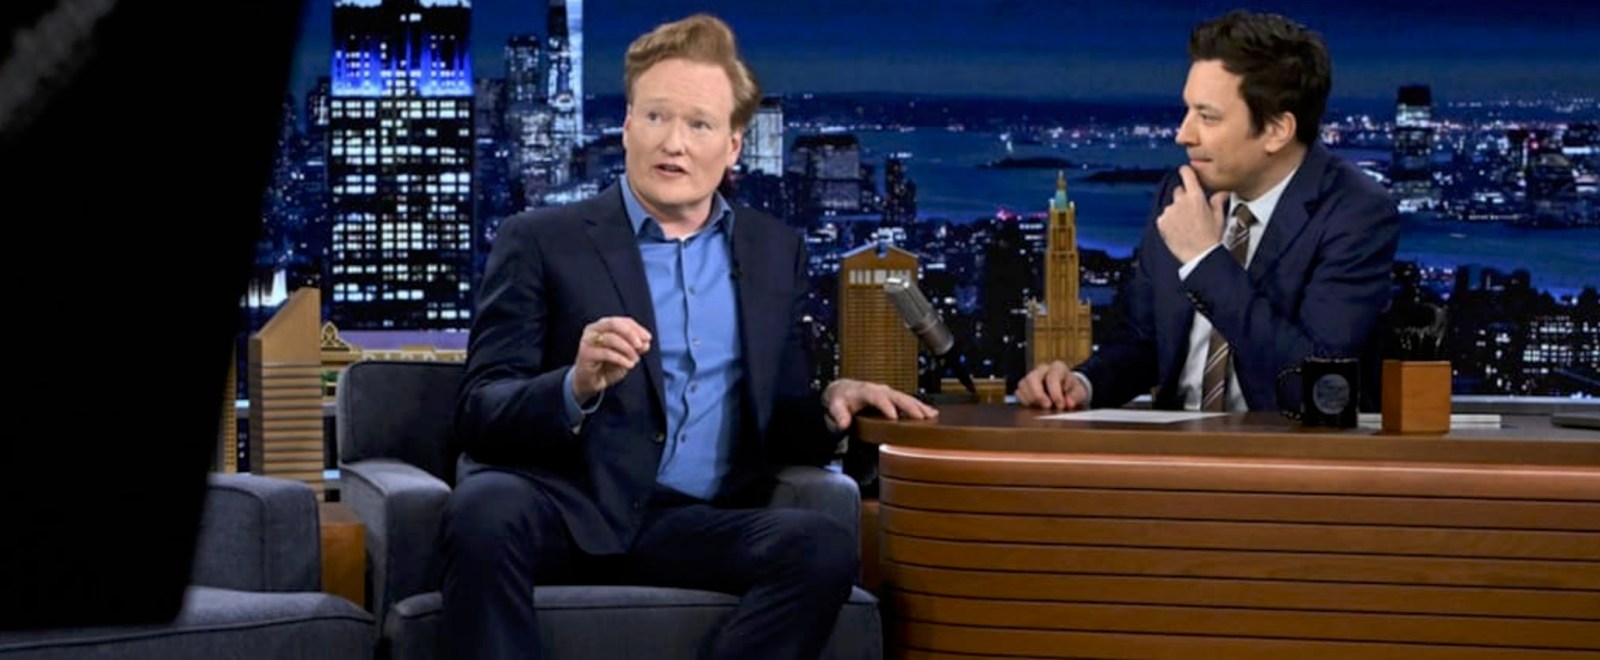 Conan O’Brien’s Long-Awaited Return To ‘The Tonight Show’ Did Not Disappoint